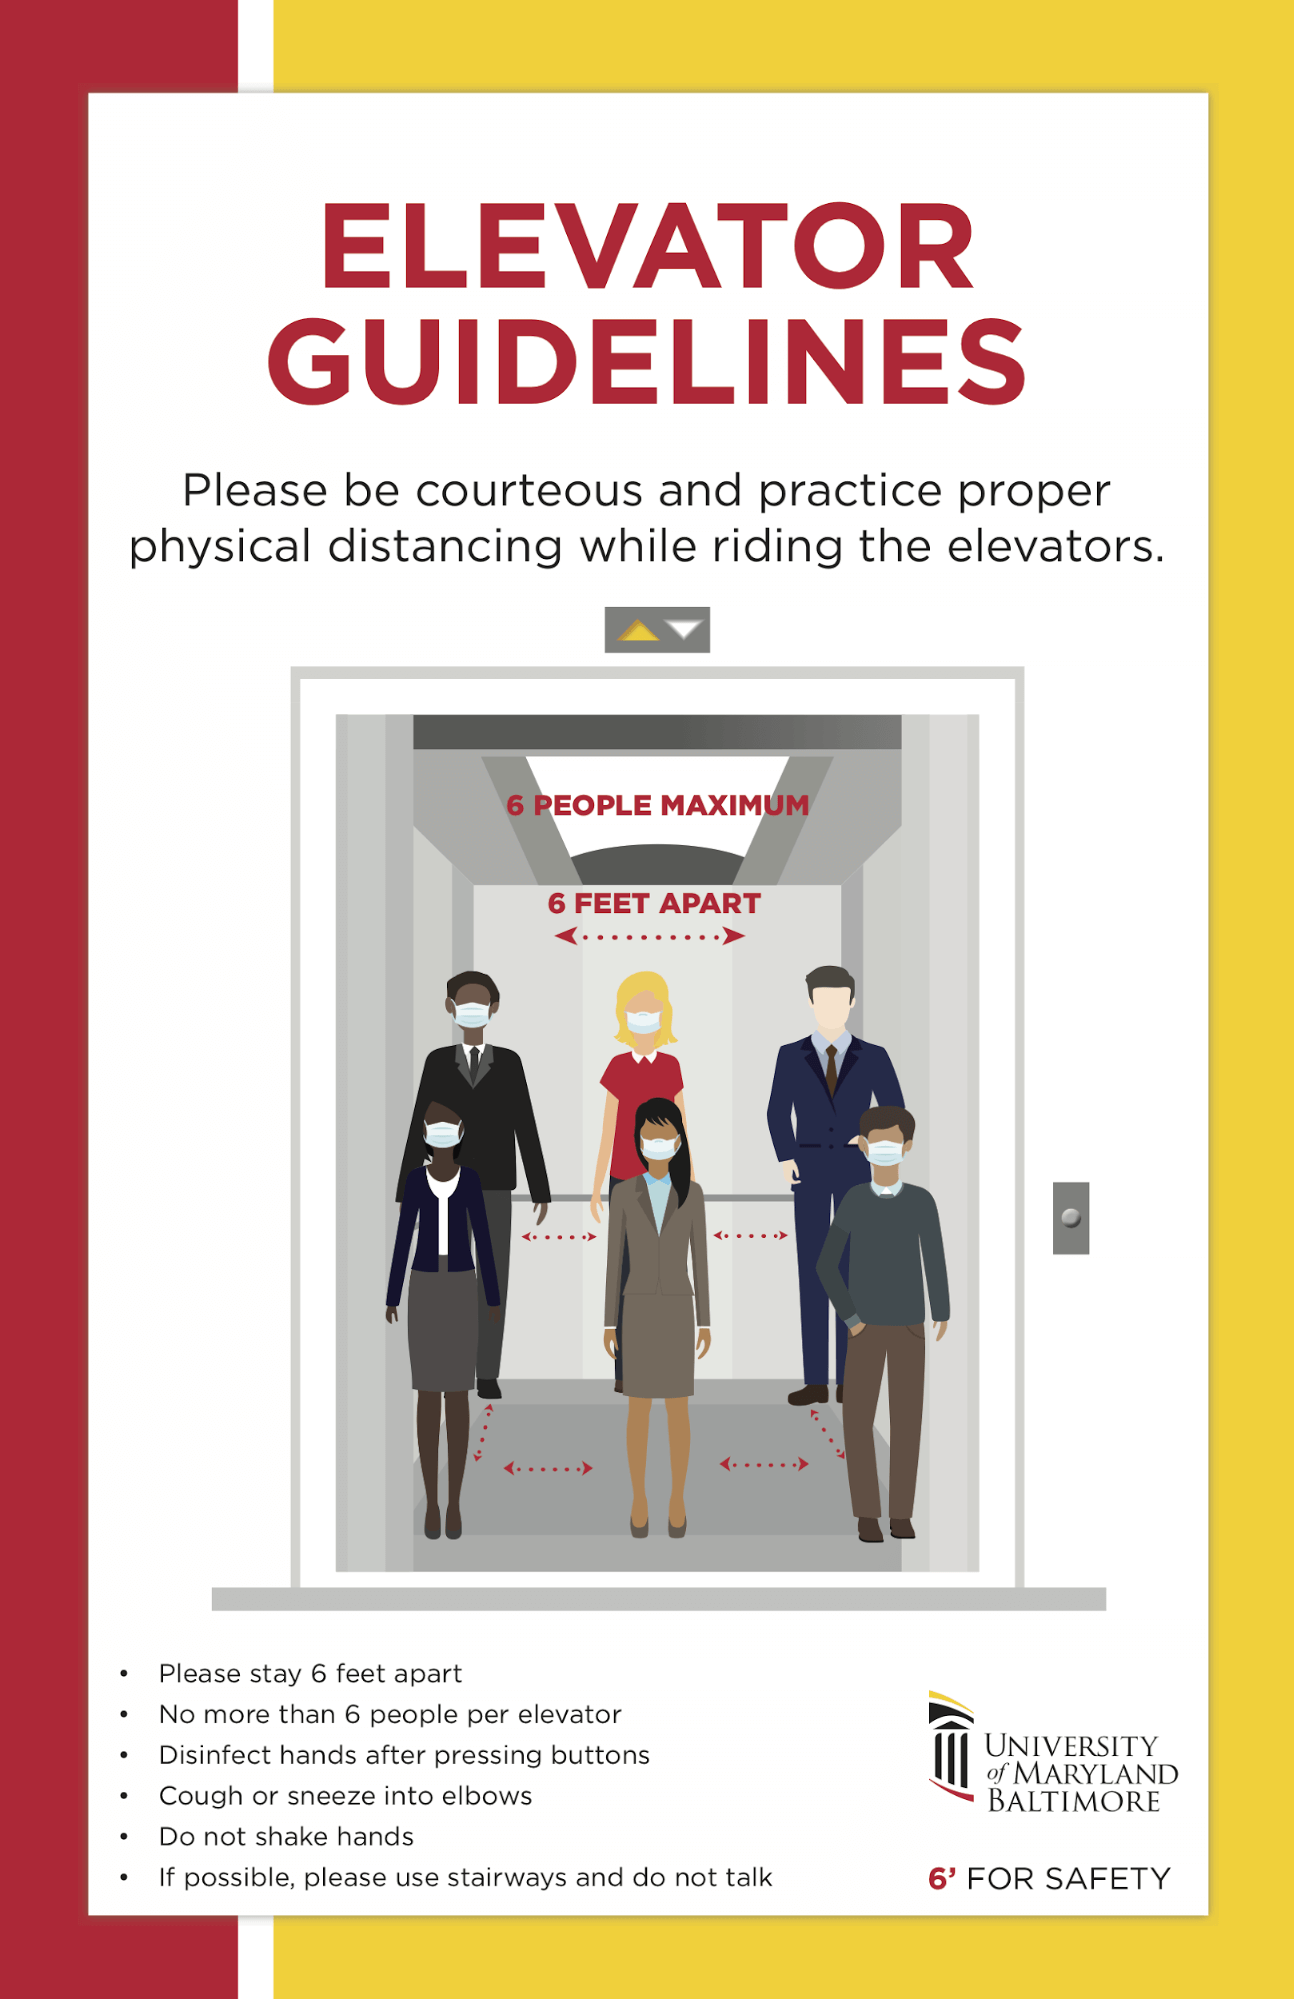 elevator guidelines for COVID-19